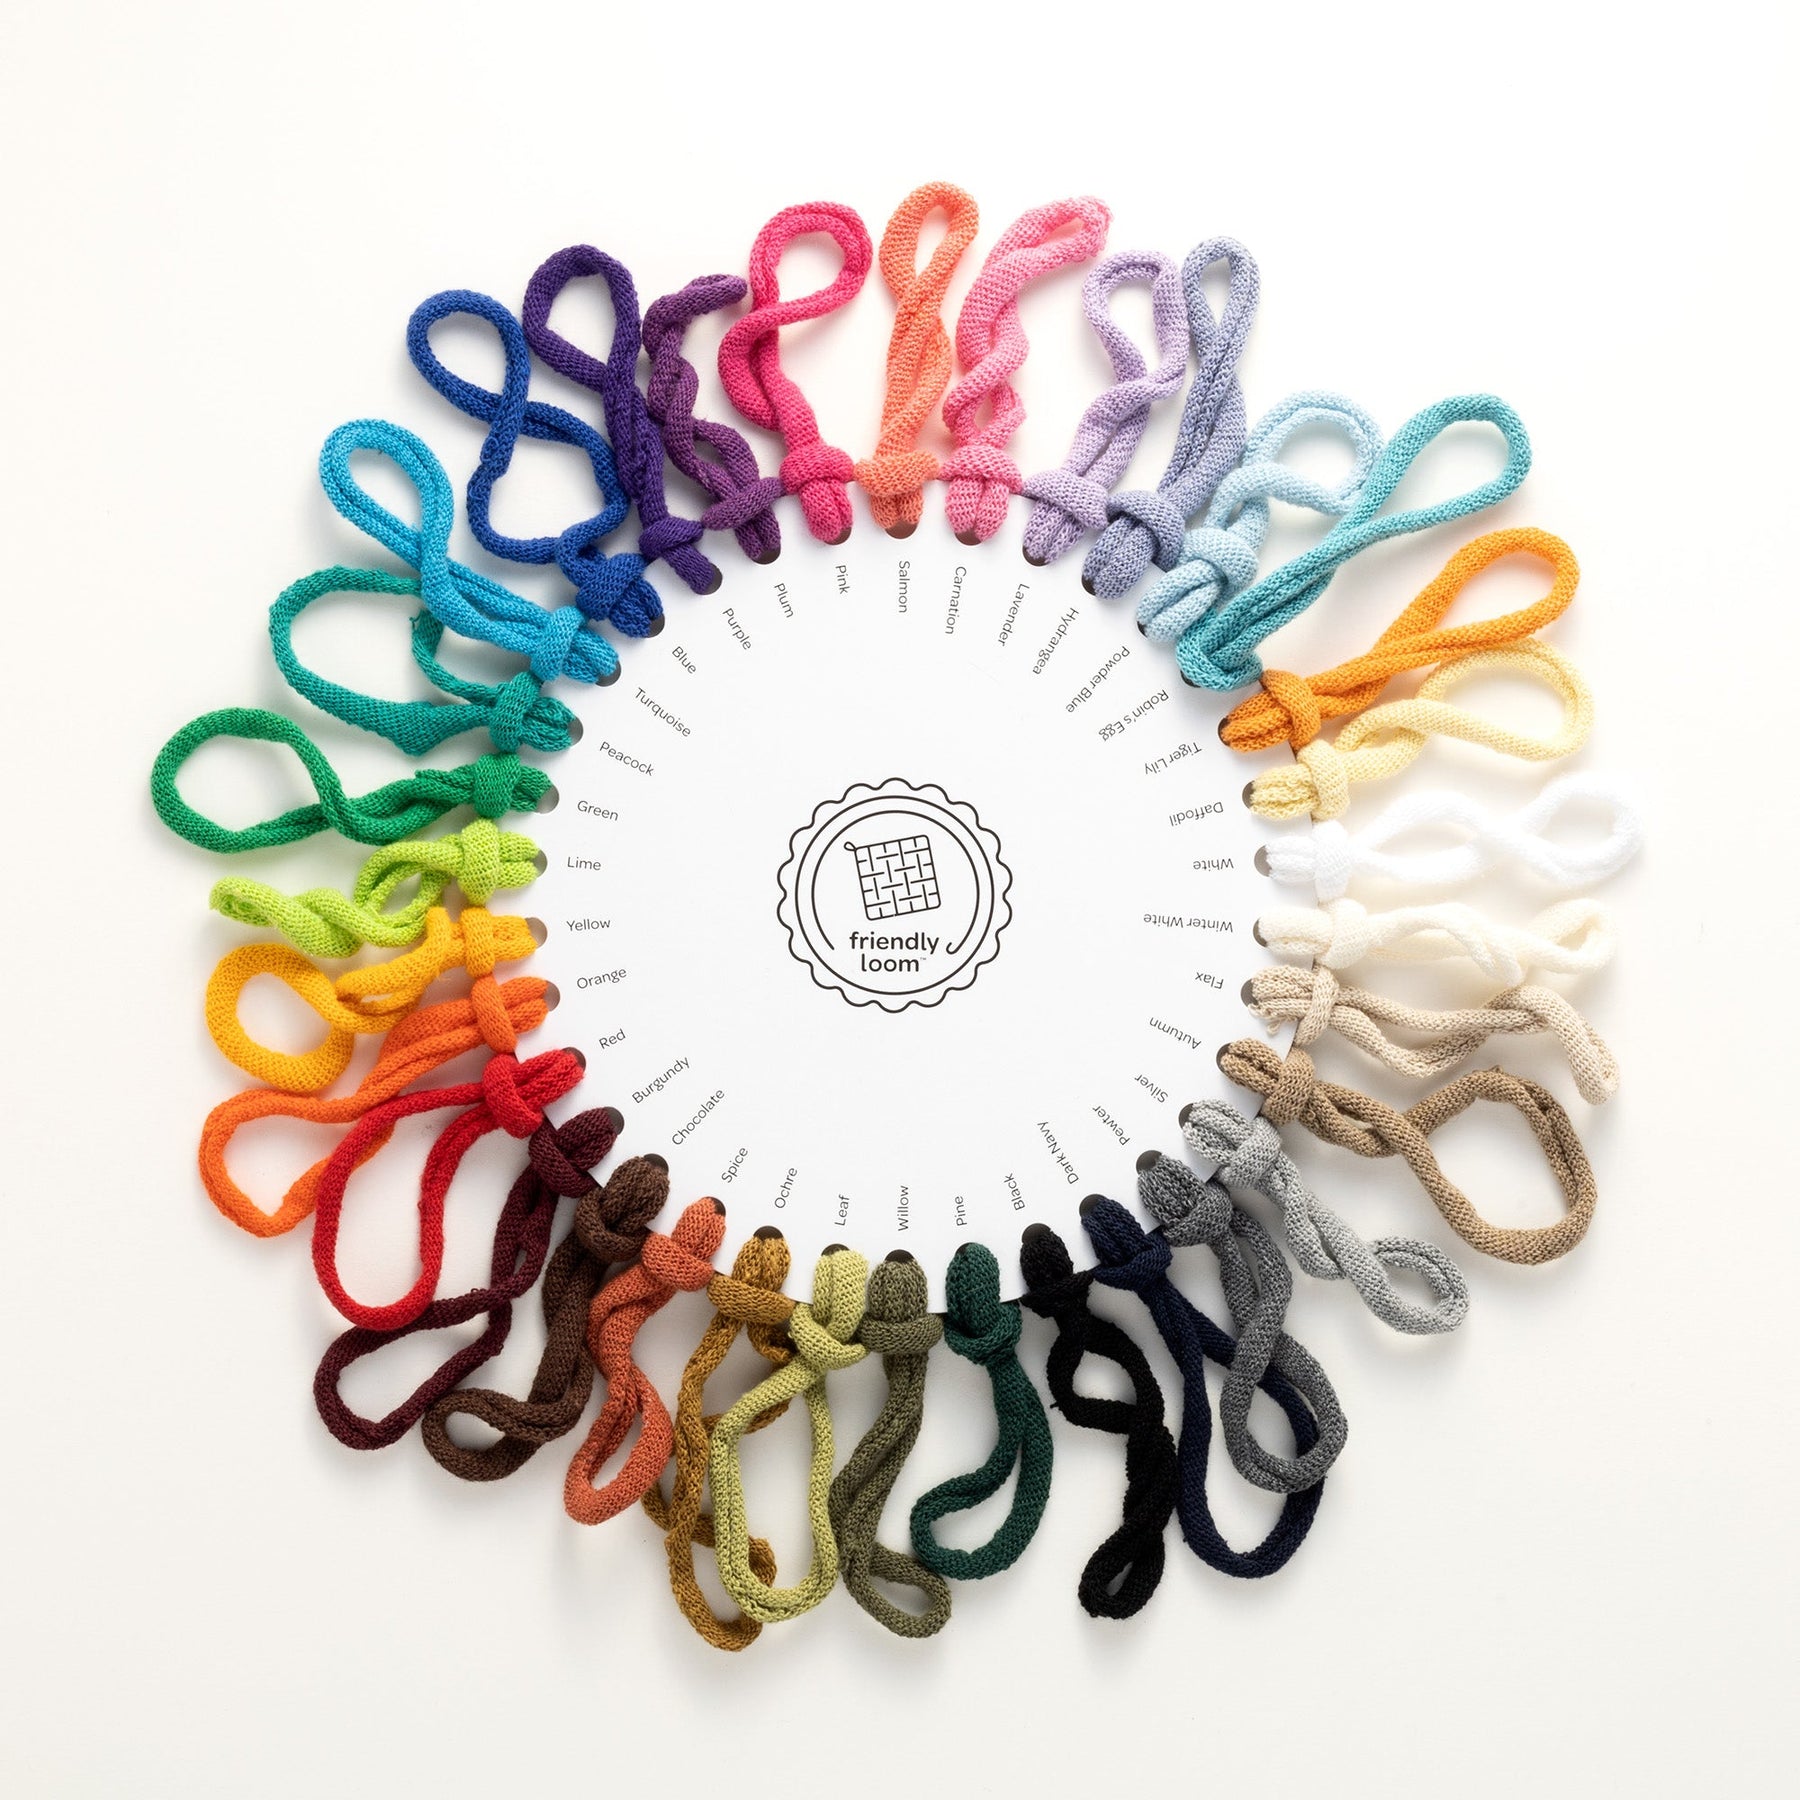 Pick a Color, Any Color – Harrisville Potholder Pro Loom Loops